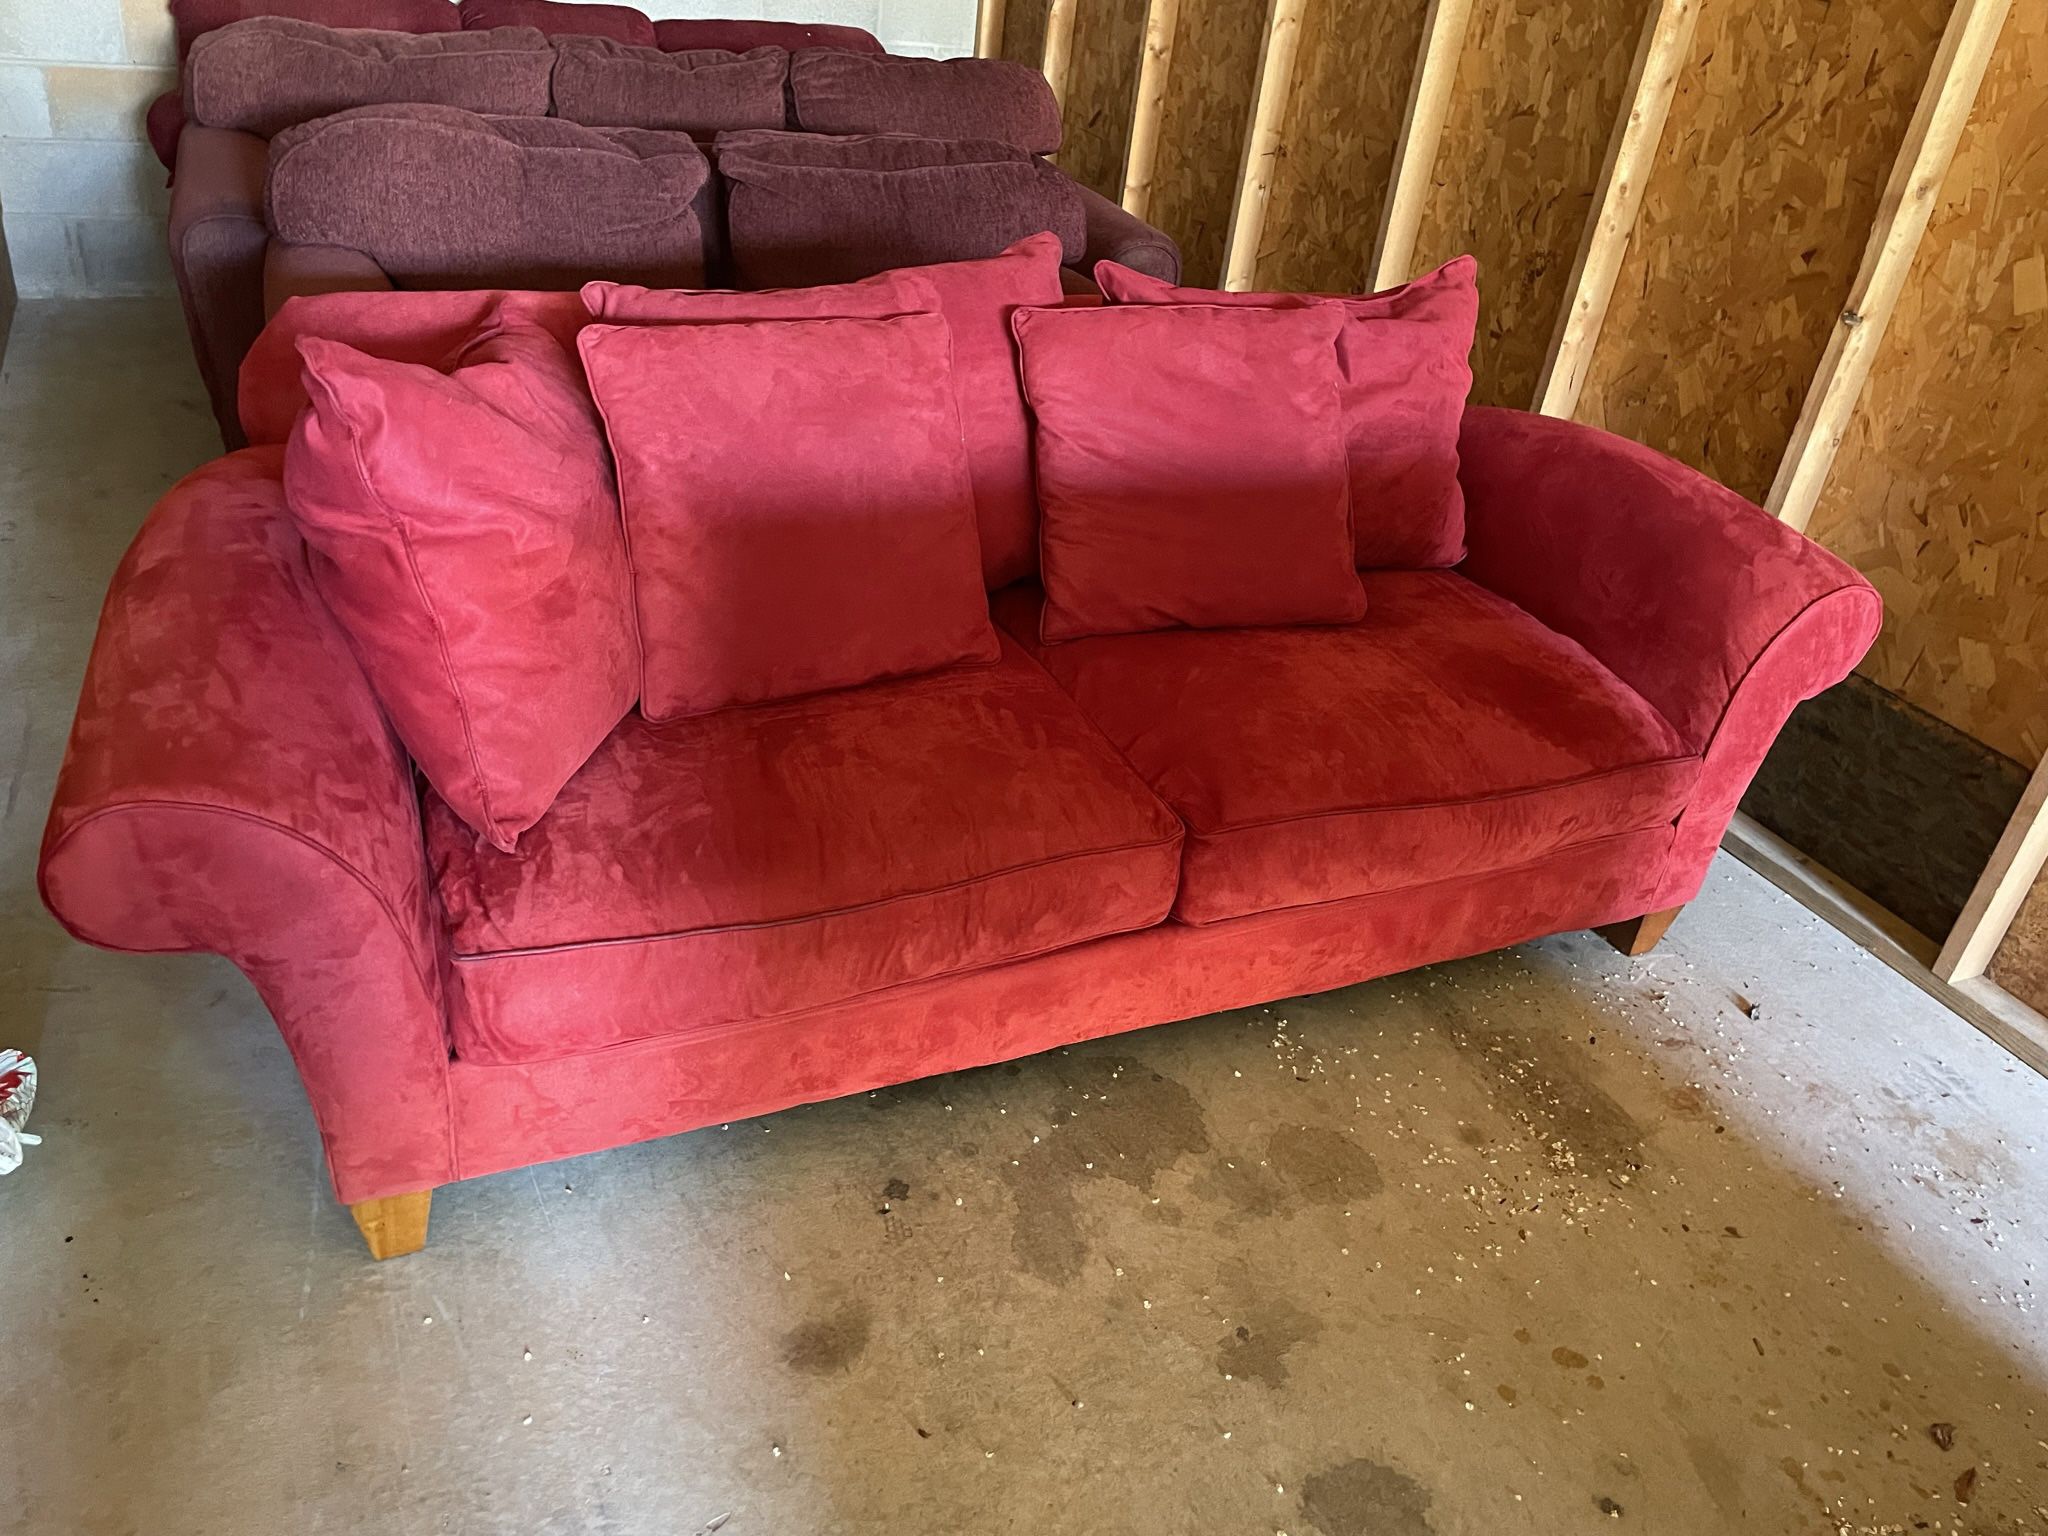 Red Couch 